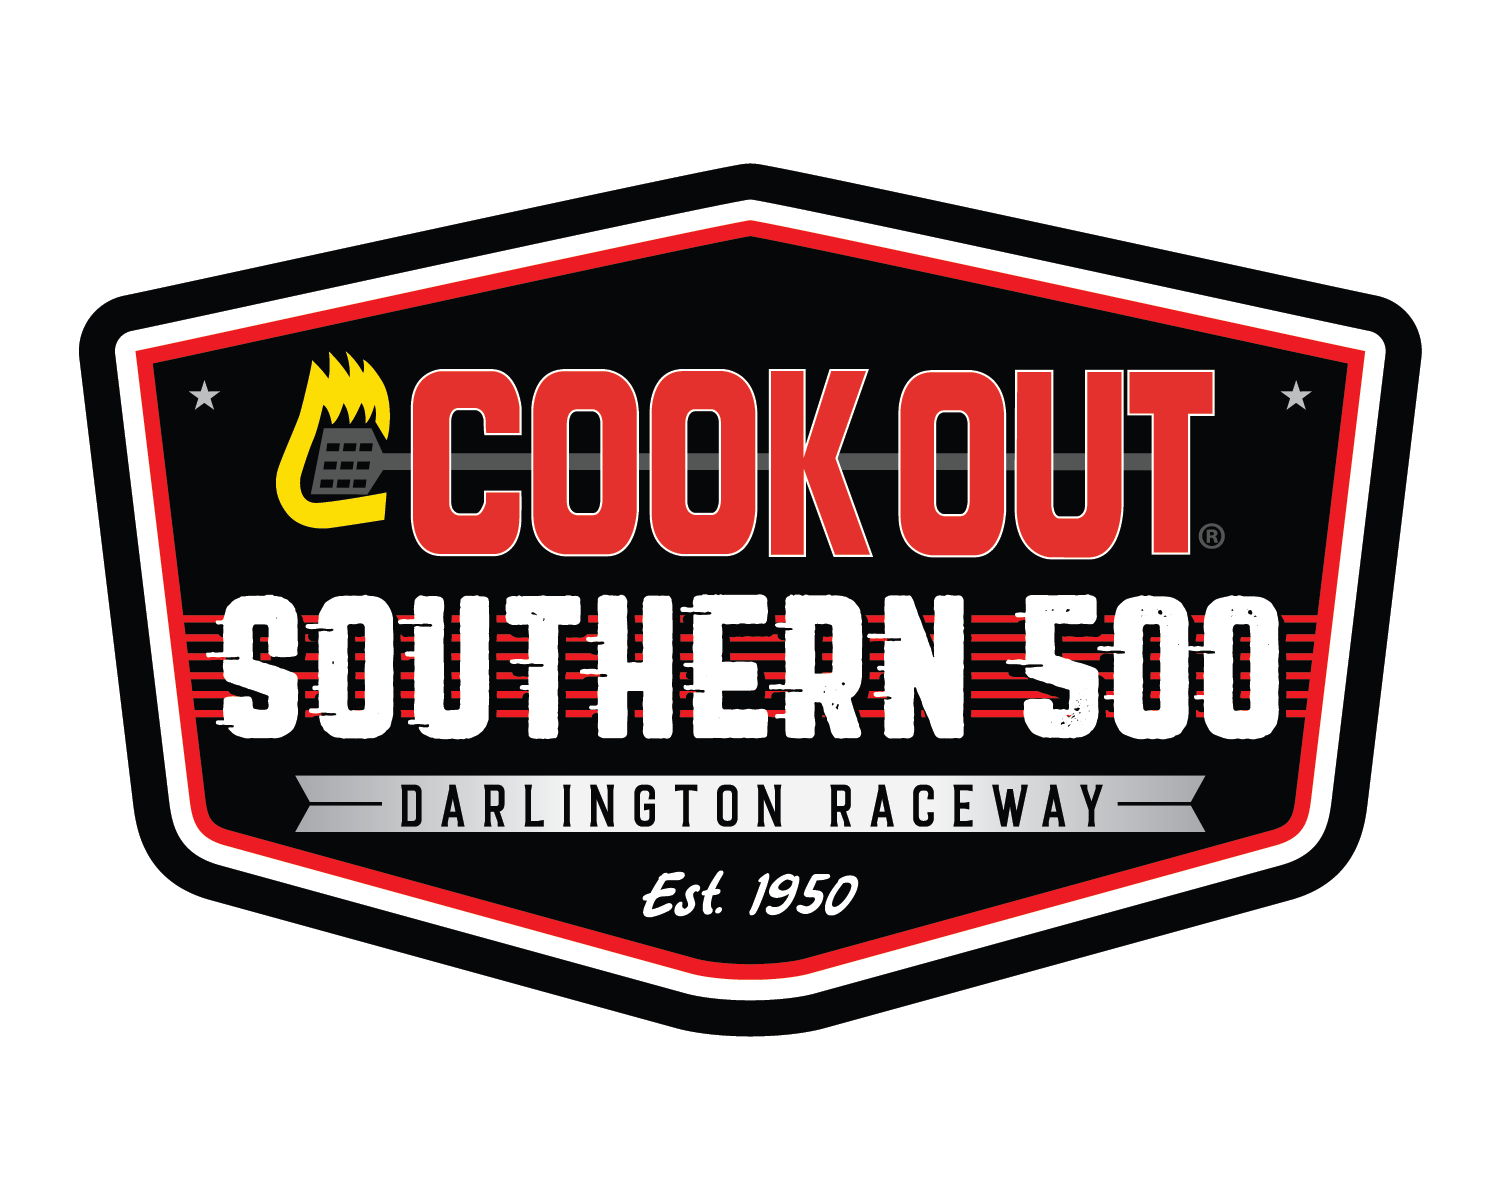 Cook Out Southern 500